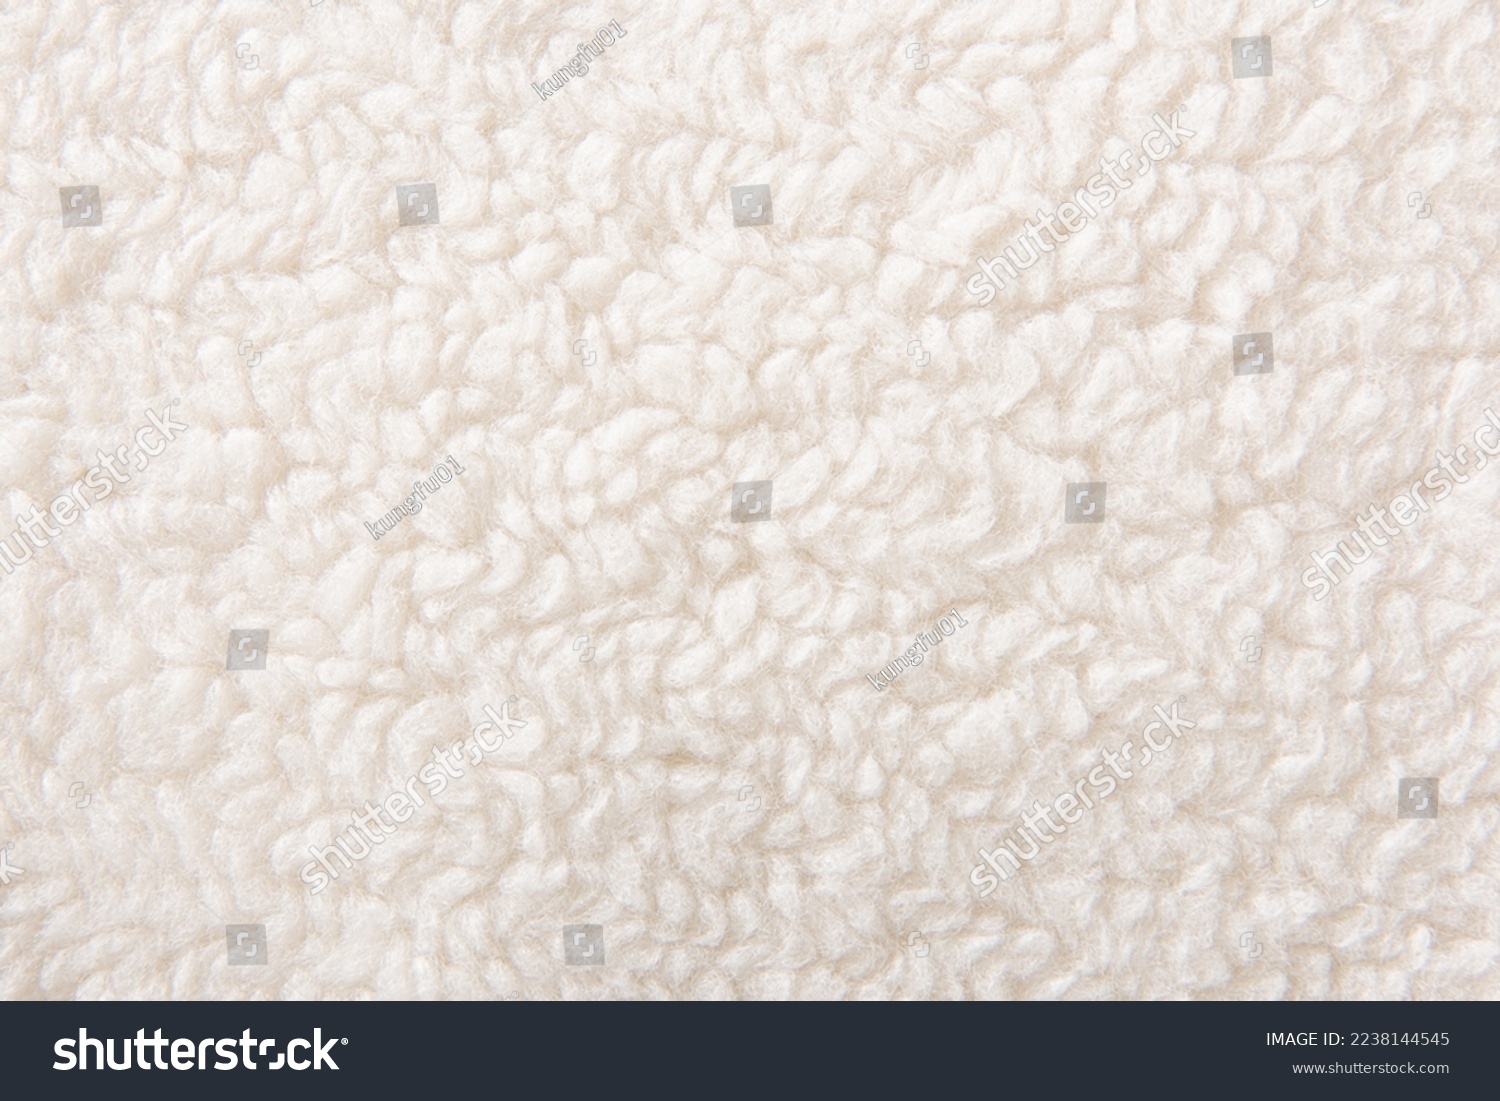 white plush fleece fabric texture background , background pattern of soft warm material #2238144545